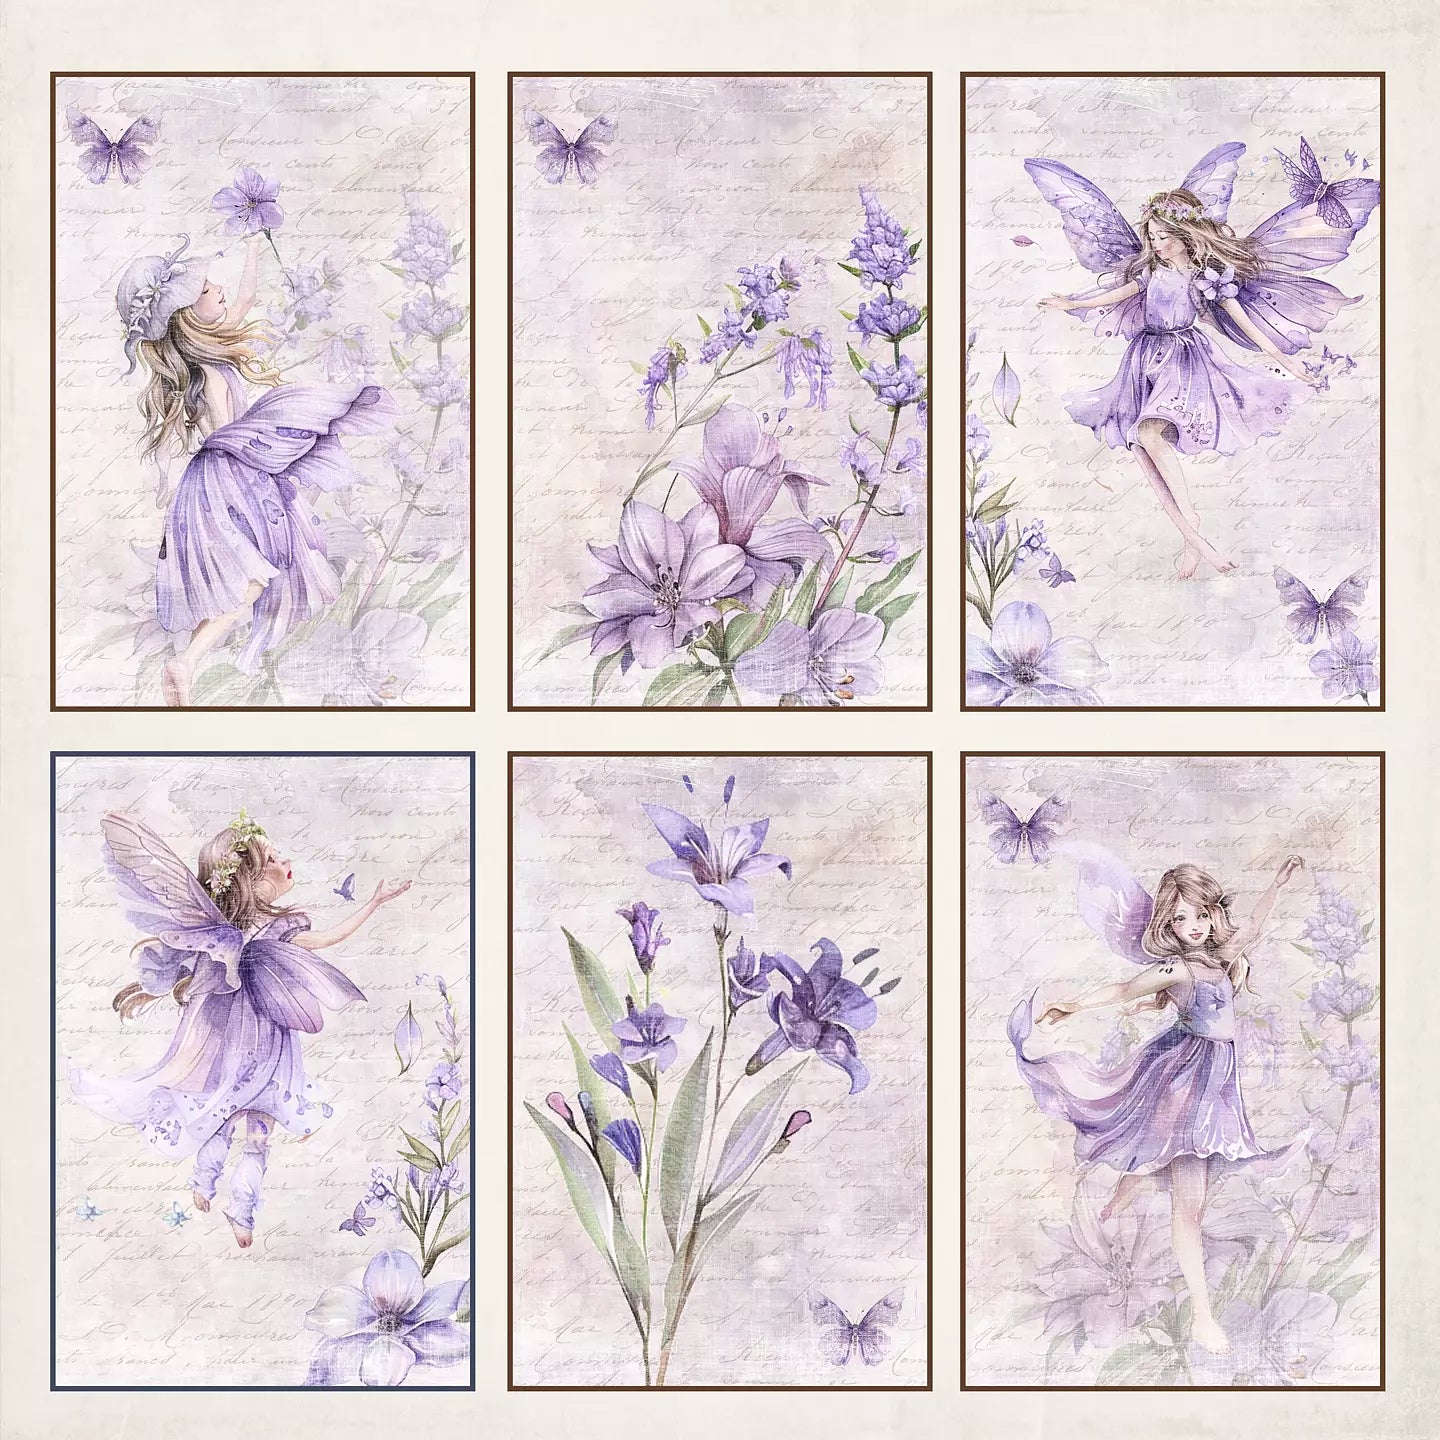 NYHET! Reprint Paperpack - Fairies Collection Paperpack - 12x12